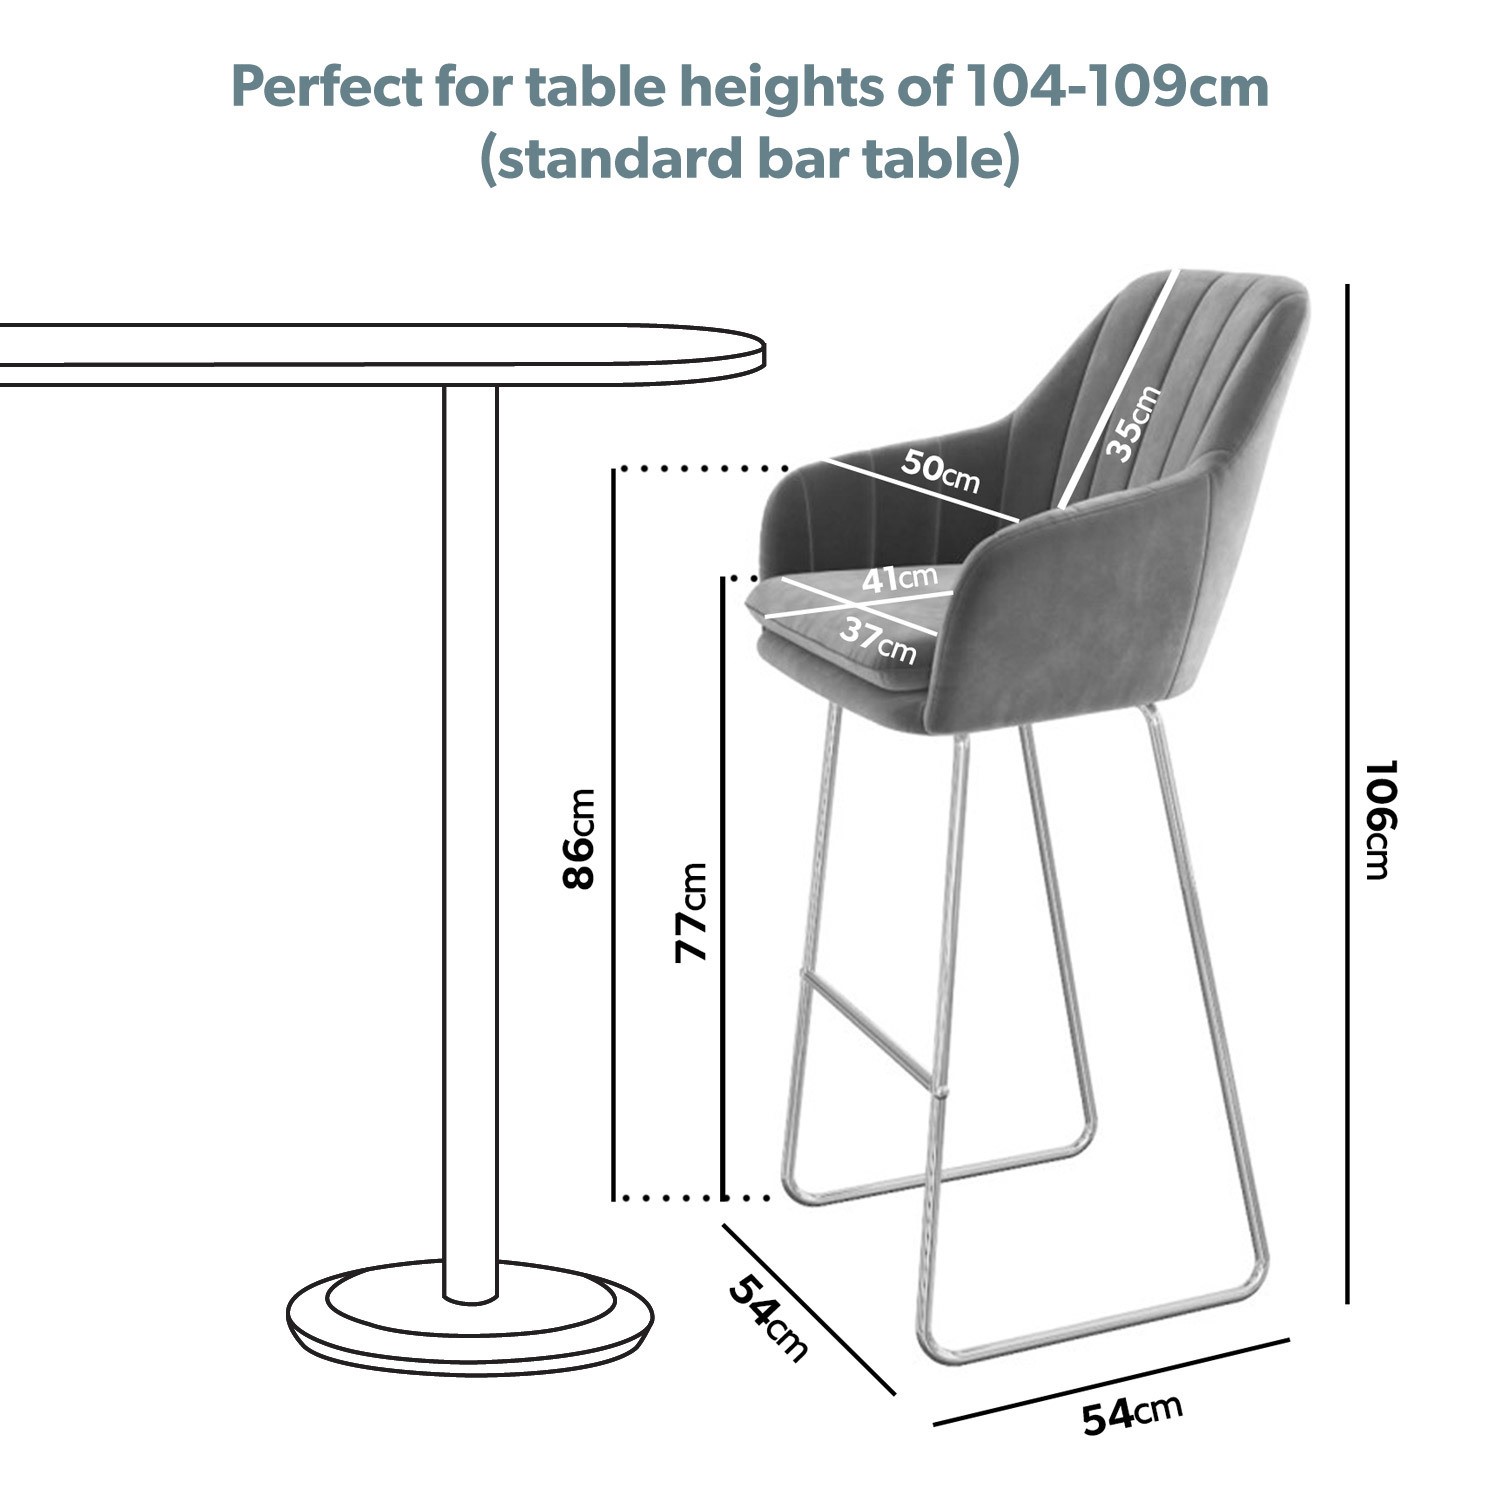 Grey Velvet Bar Stool With Arms 77cm, Leather Bar Stools With Backs And Arms Uk